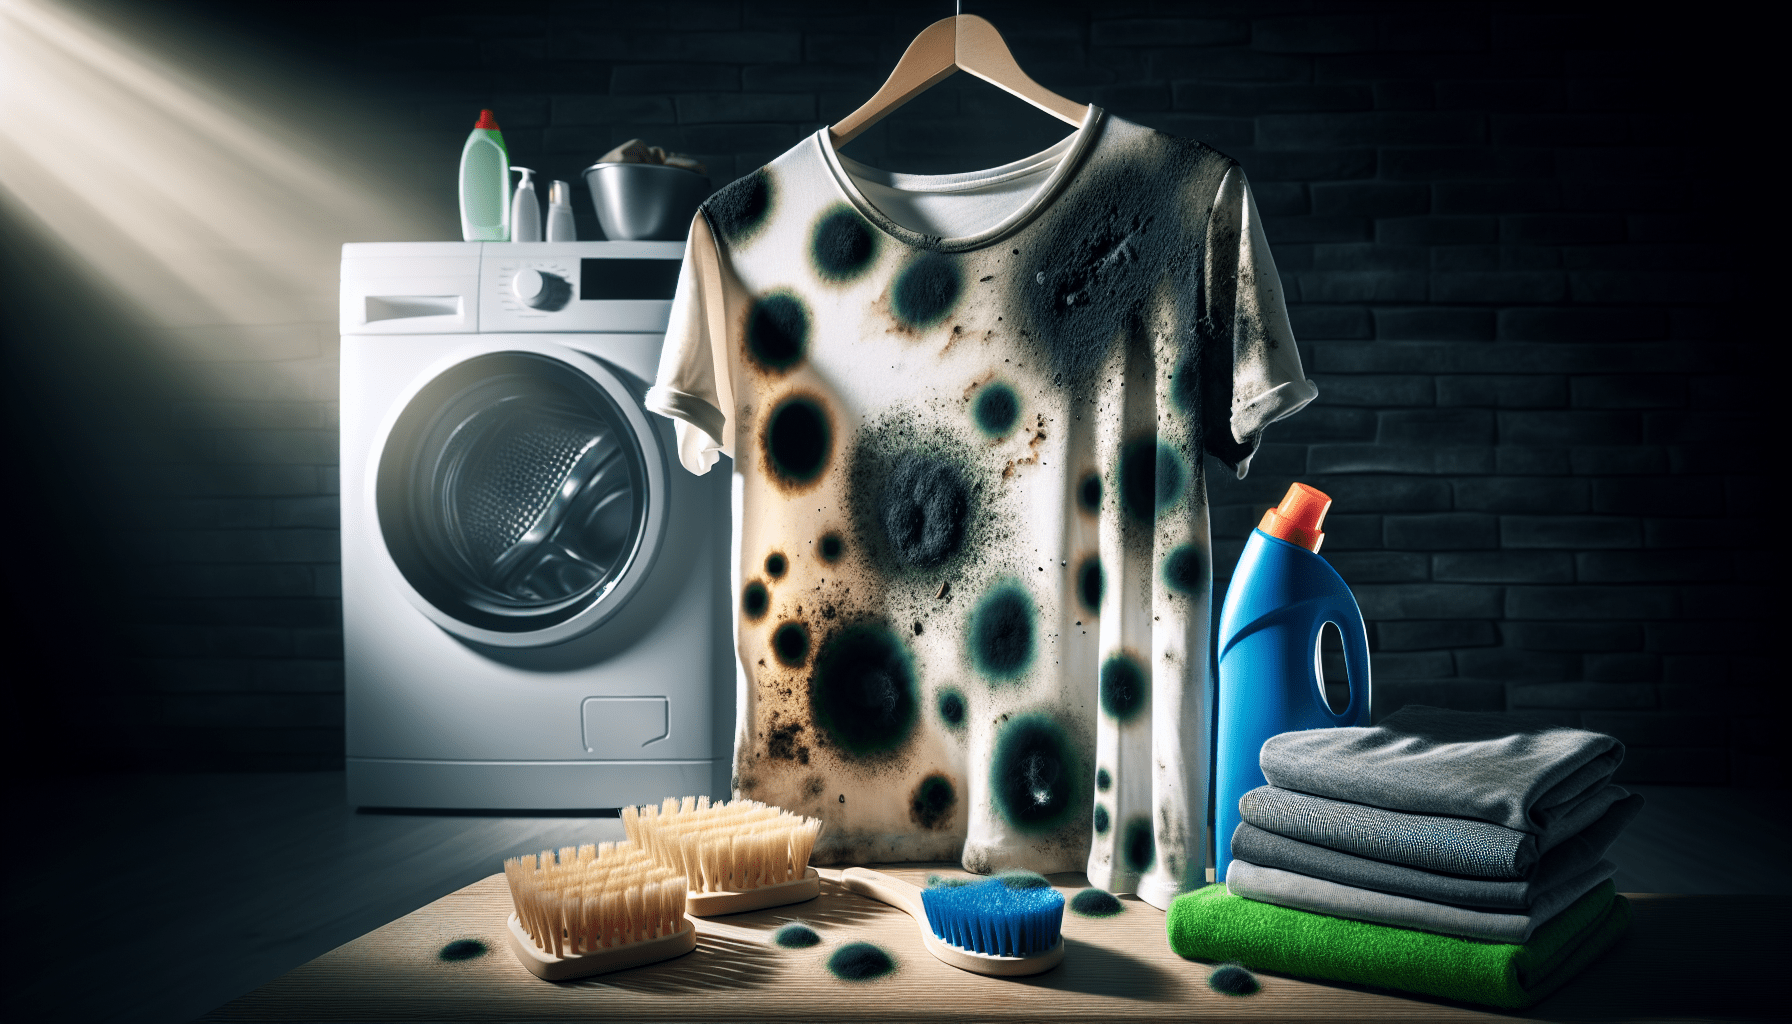 How to Deal with Mold Growing on Your Clothes